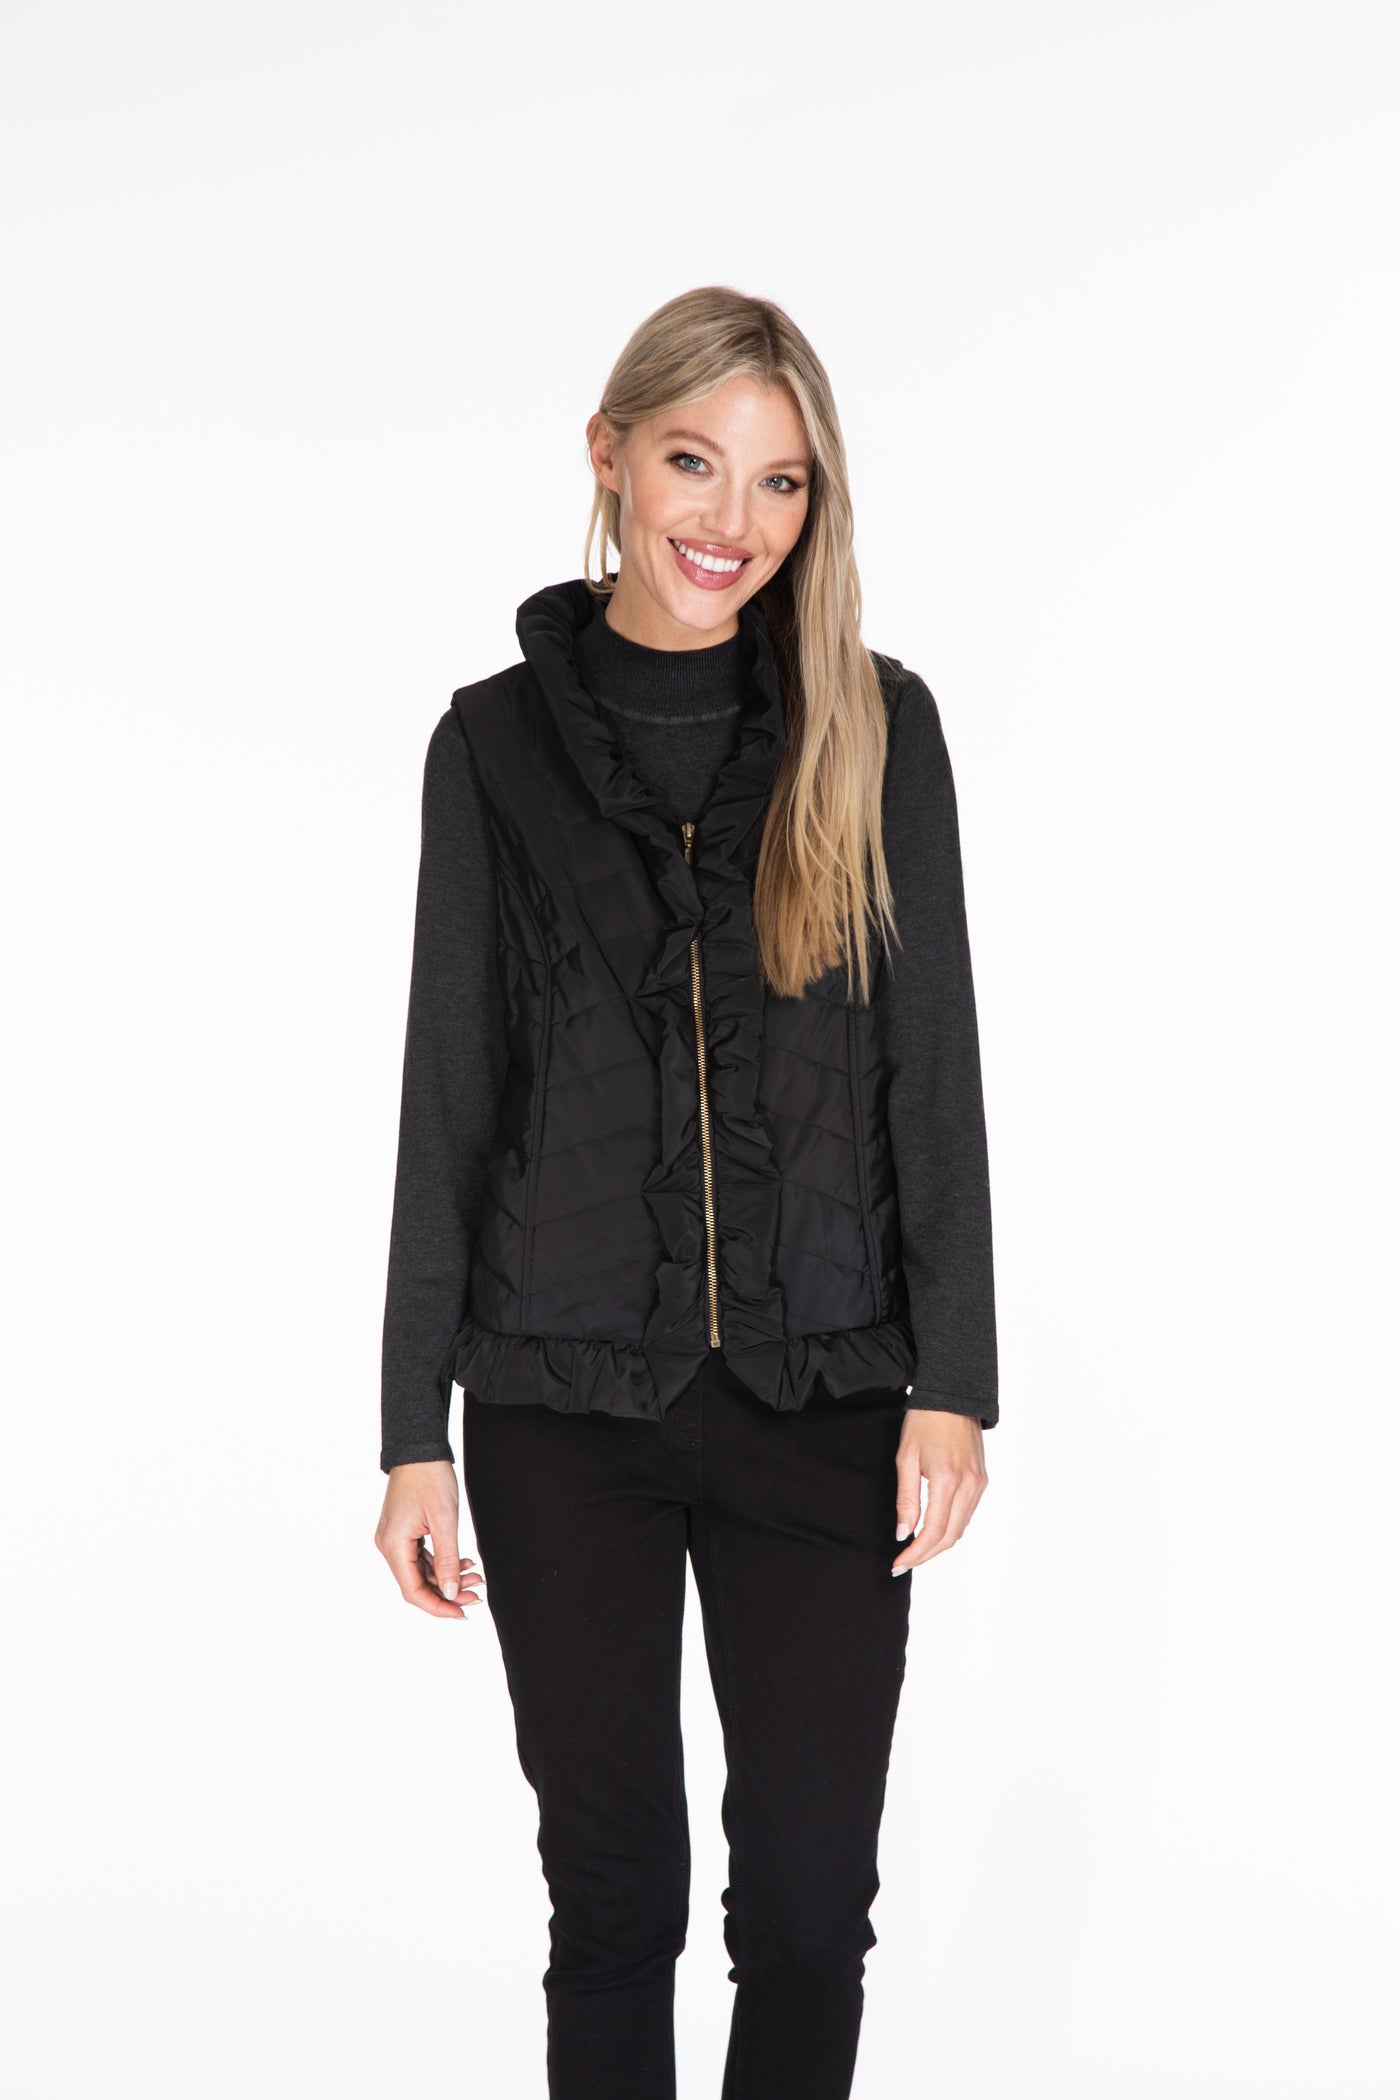 Ruffle Quilted Vest - Women's - Black